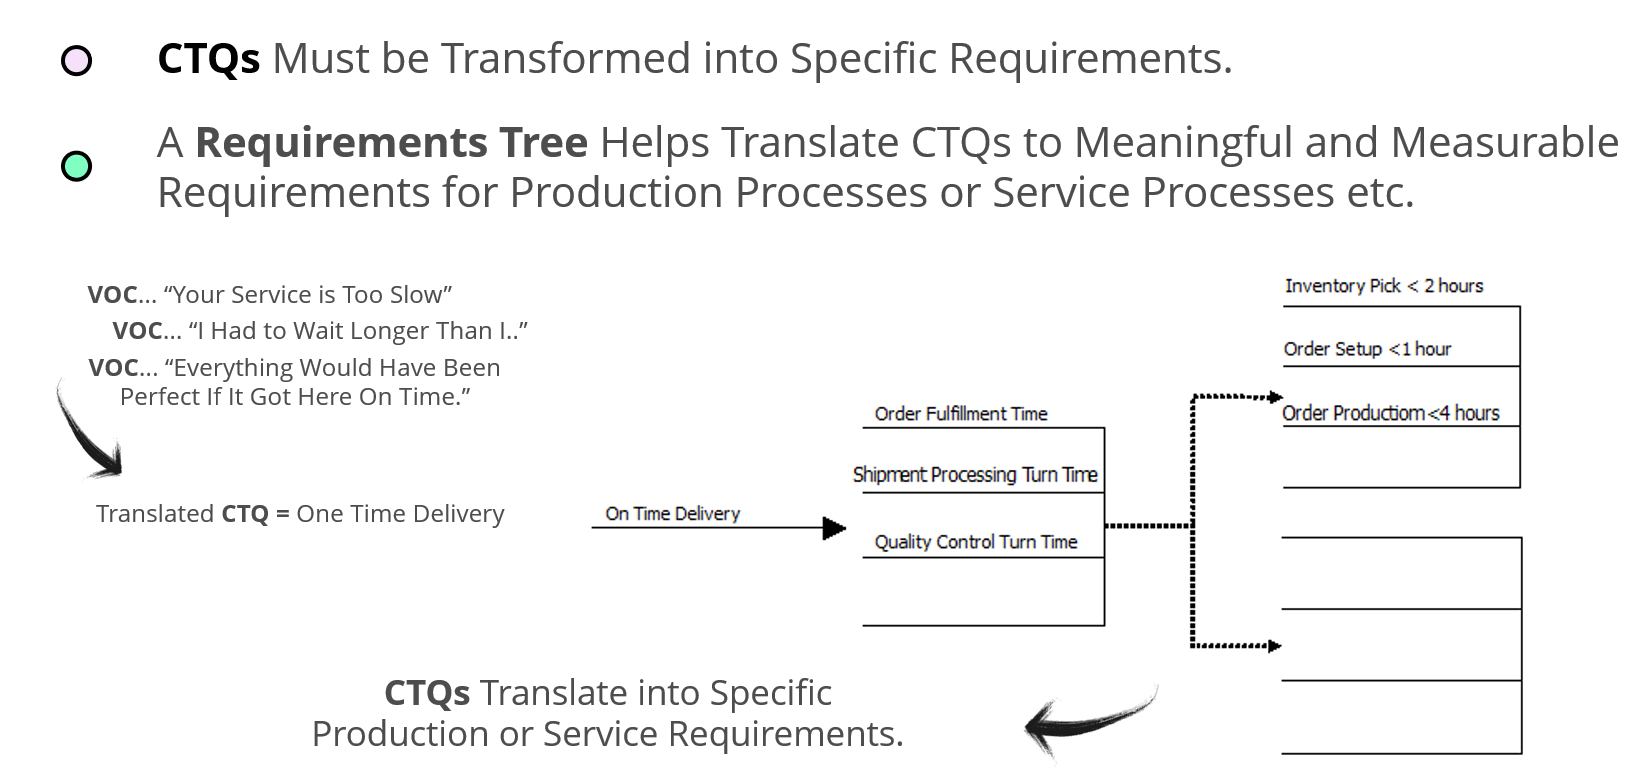 Translating CTQs into Requirements